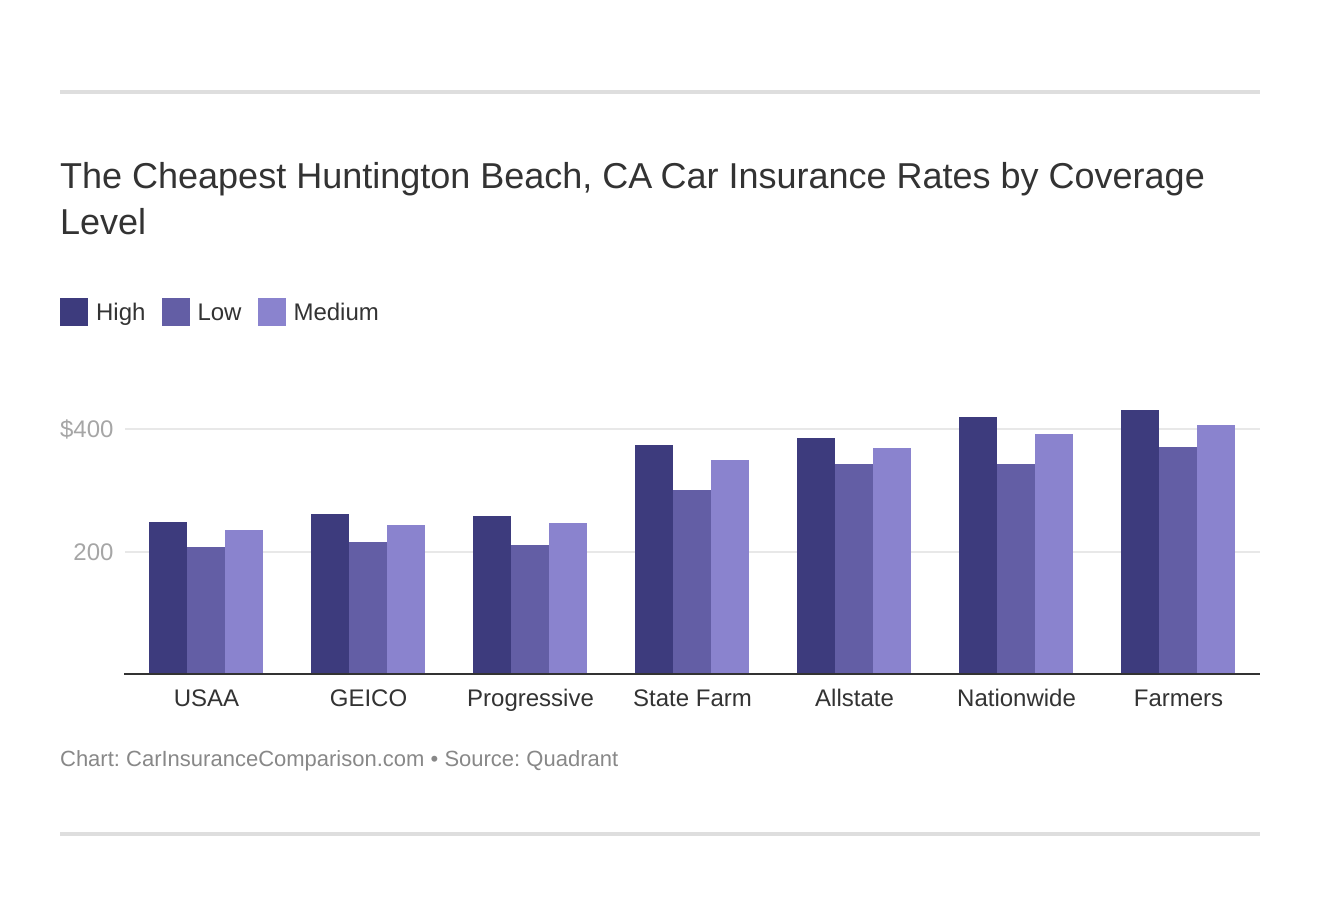 The Cheapest Huntington Beach, CA Car Insurance Rates by Coverage Level